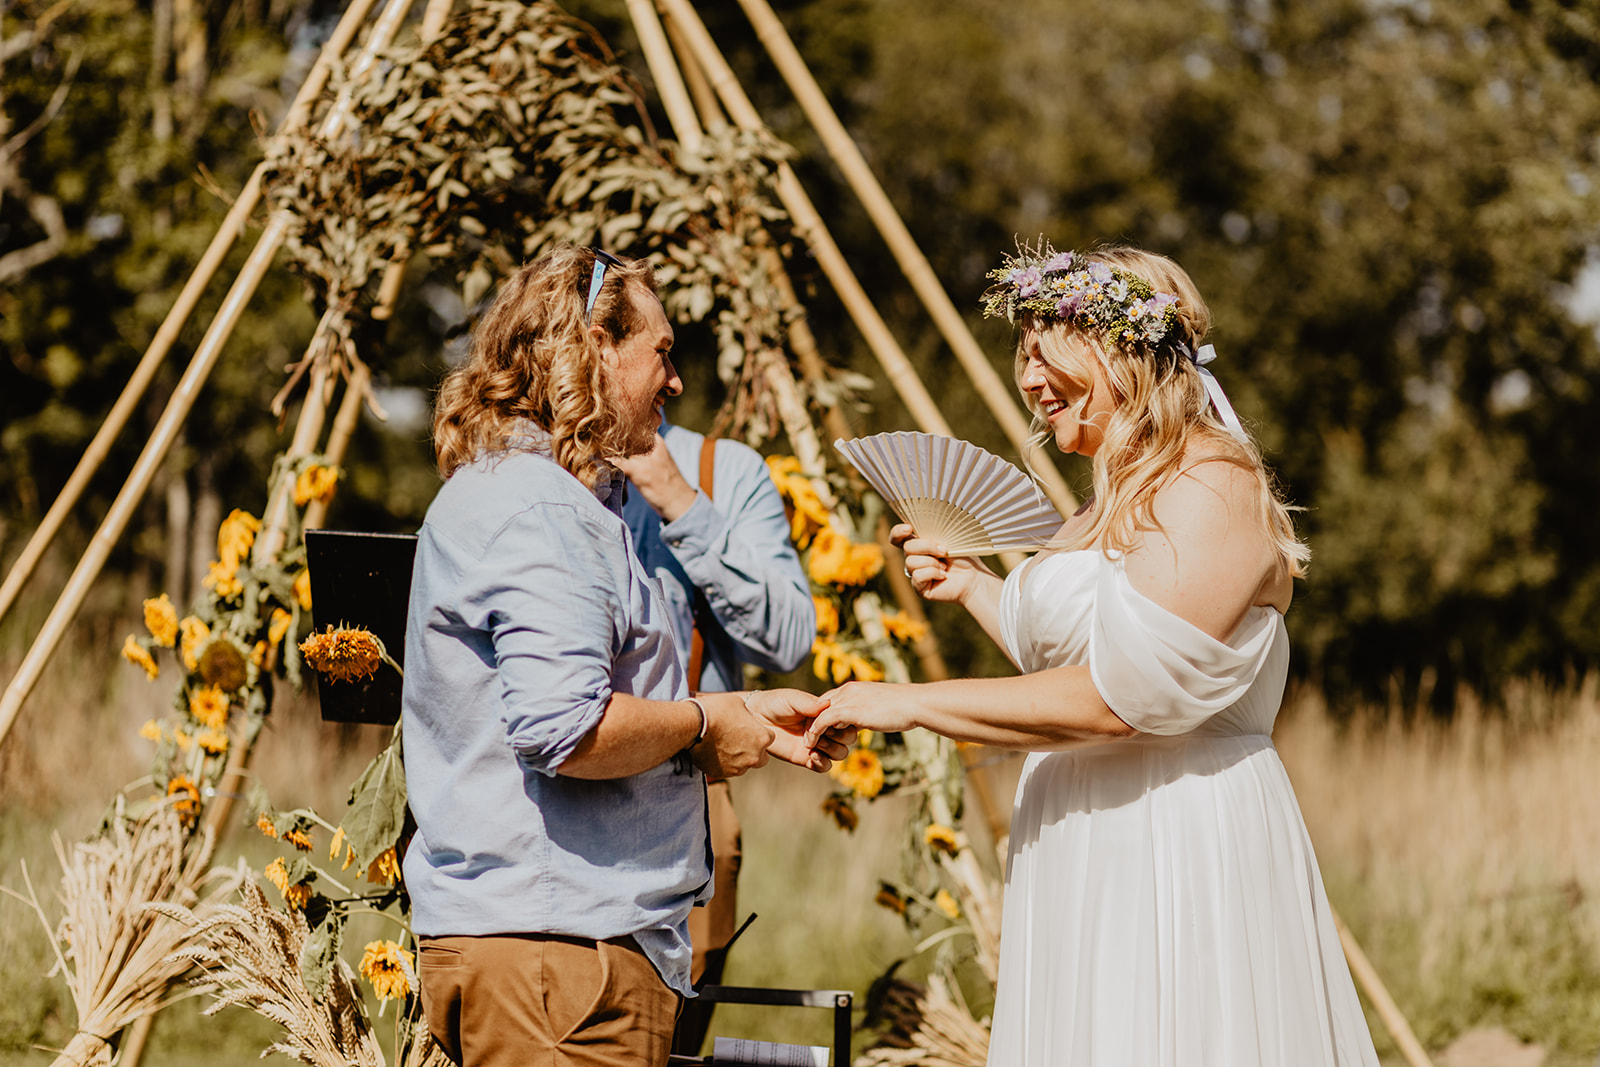 Bride and Groom exchanging vows at a wedding at Mac's Farm in Sussex. By OliveJoy Photography.